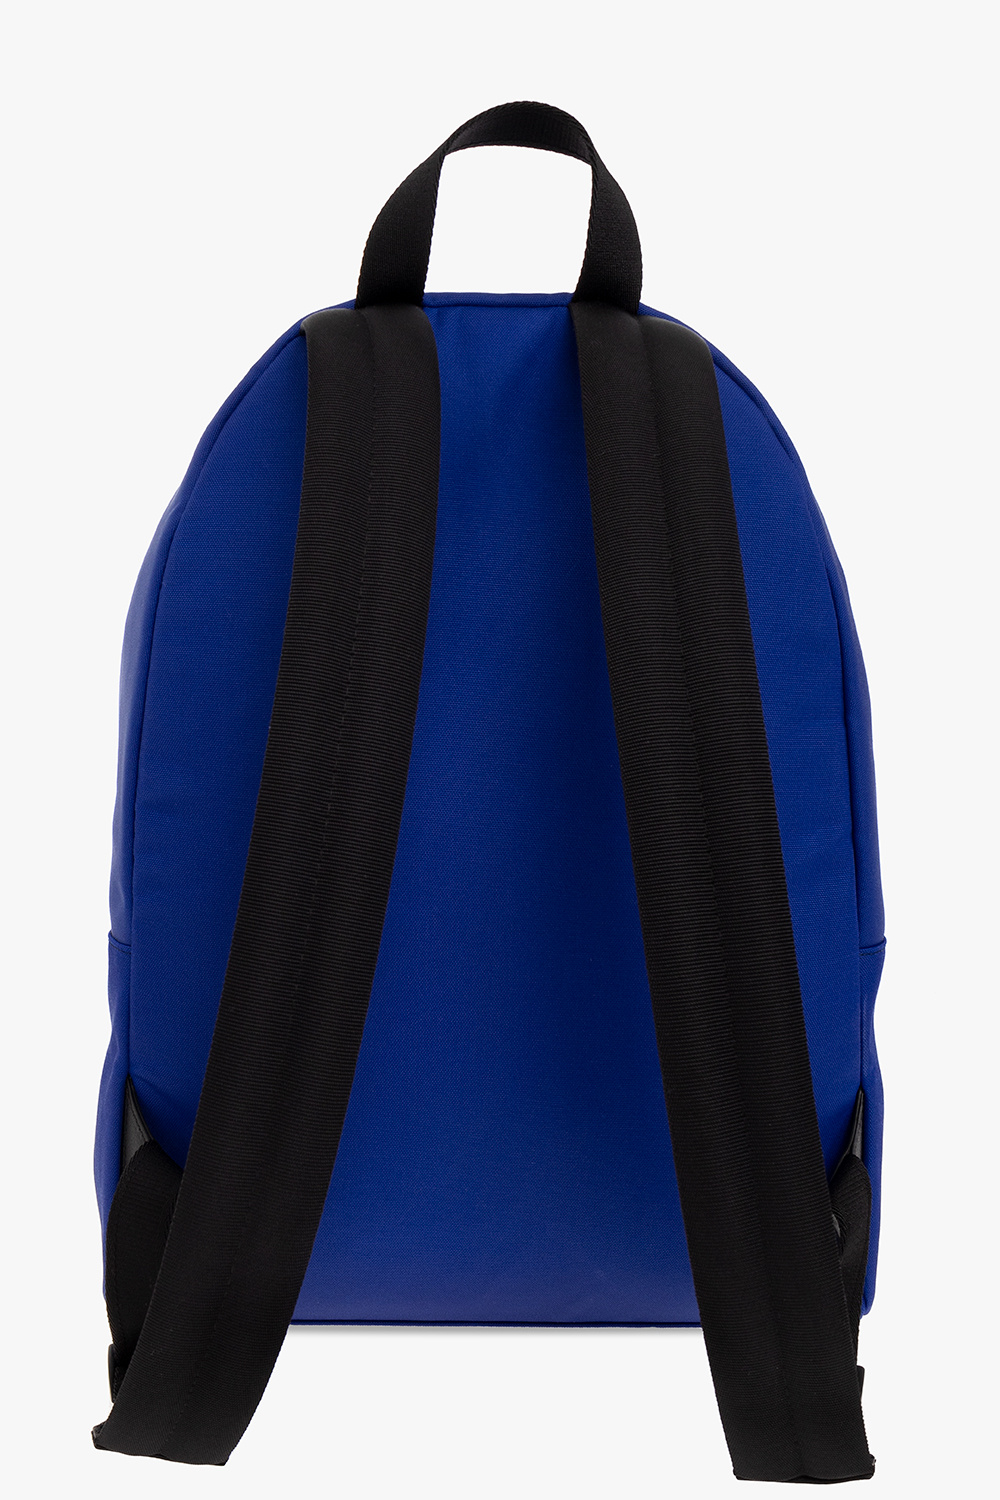 givenchy Disneys ‘Essential’ backpack